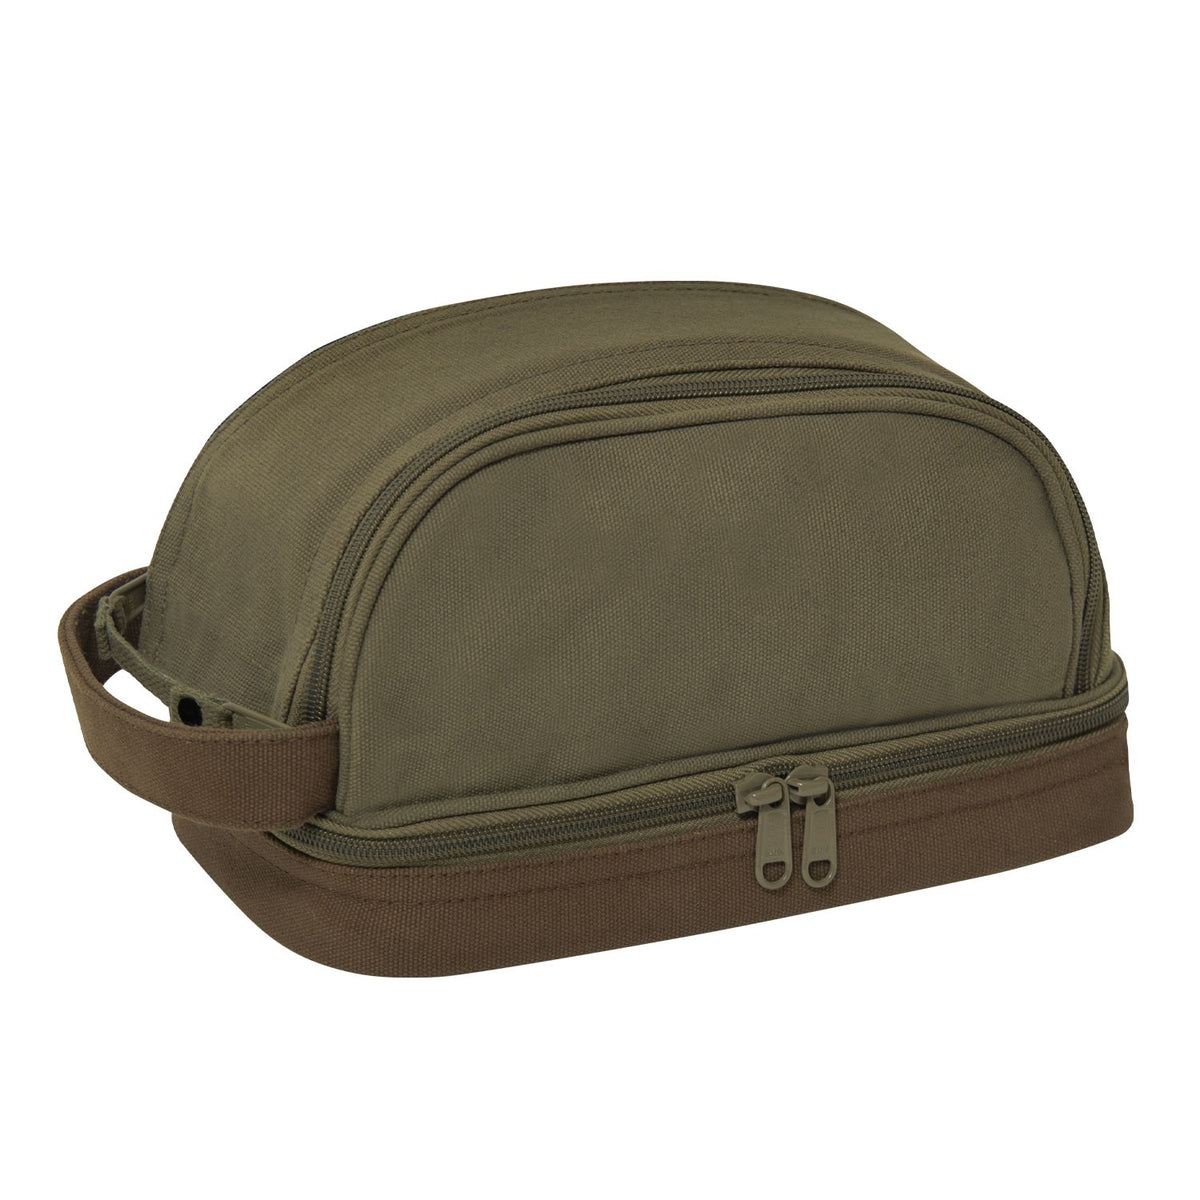 Rothco Deluxe Canvas Travel Kit Olive Drab